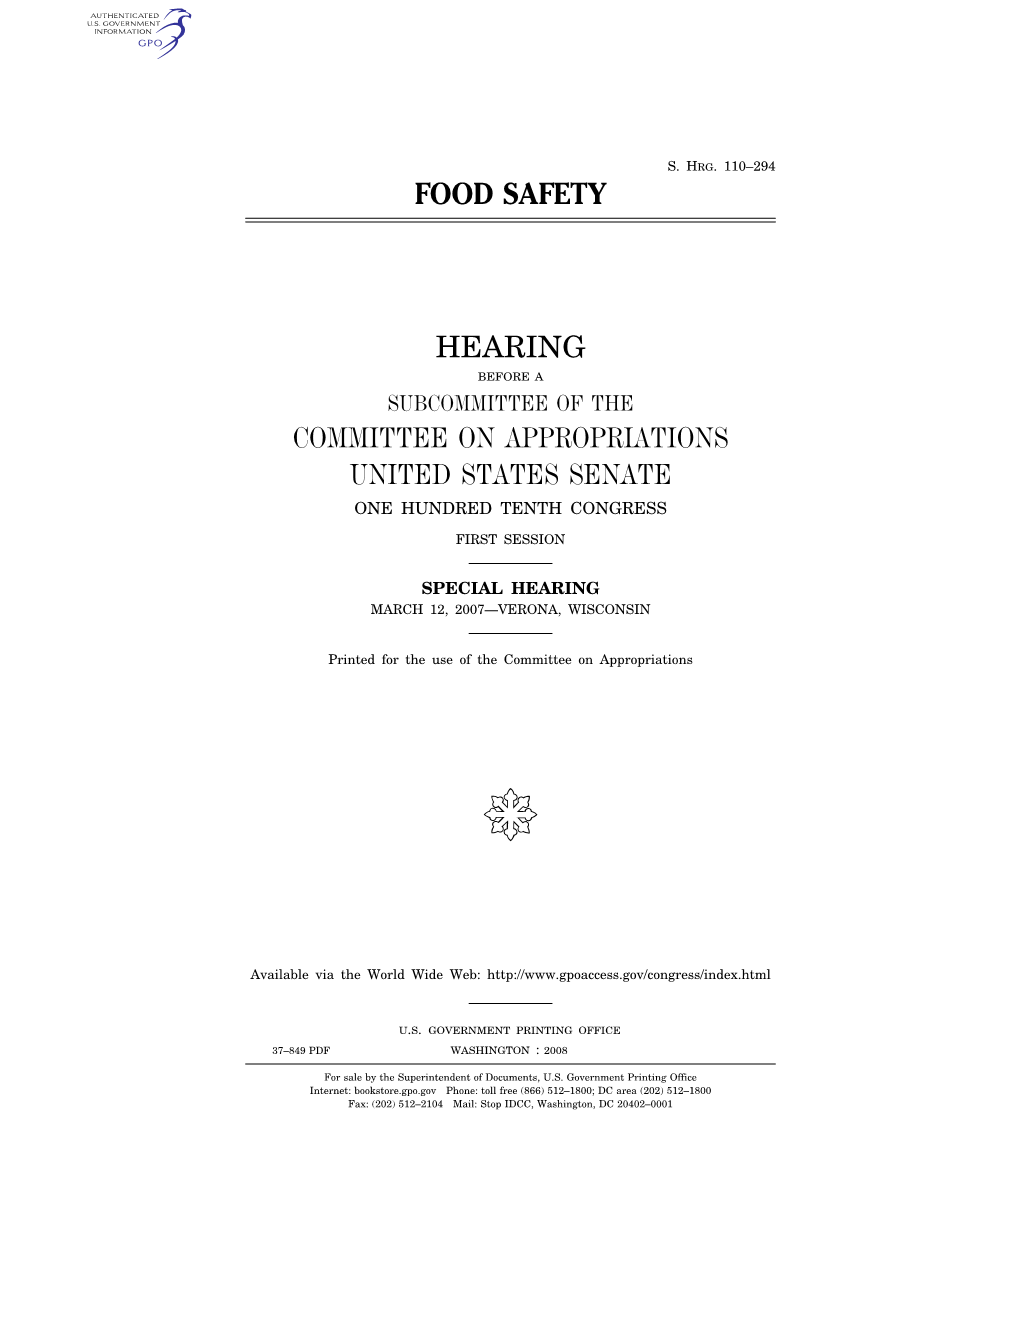 Food Safety Hearing Committee on Appropriations United States Senate